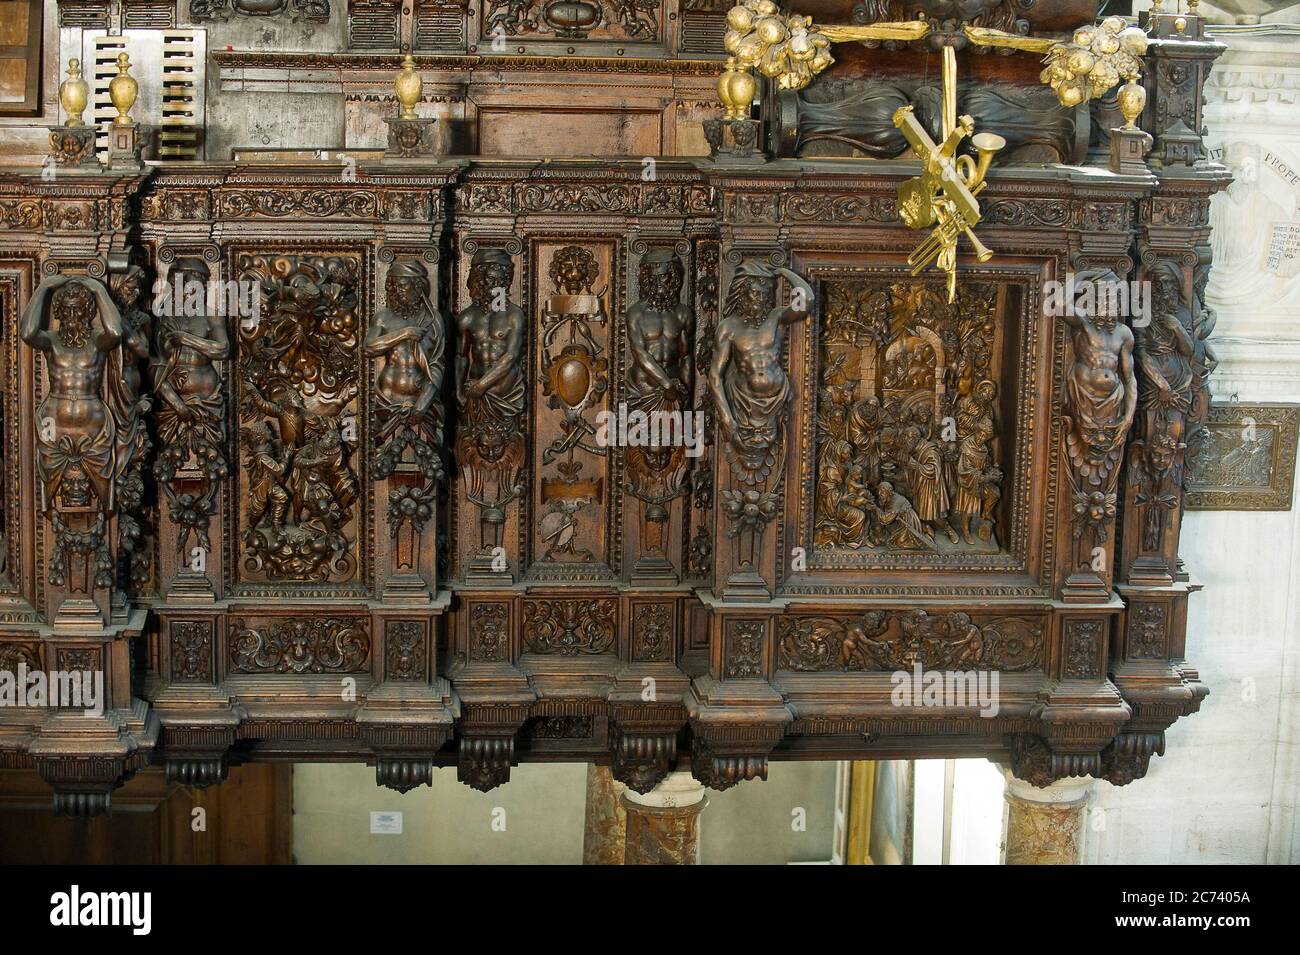 Europe, Italy, Lombardy, Tirano, Valtellina, Sanctuary of the Beata Vergine di Tirano Cabinet of the Organ, magnificence of cabinet-making and carved in wood. Stock Photo